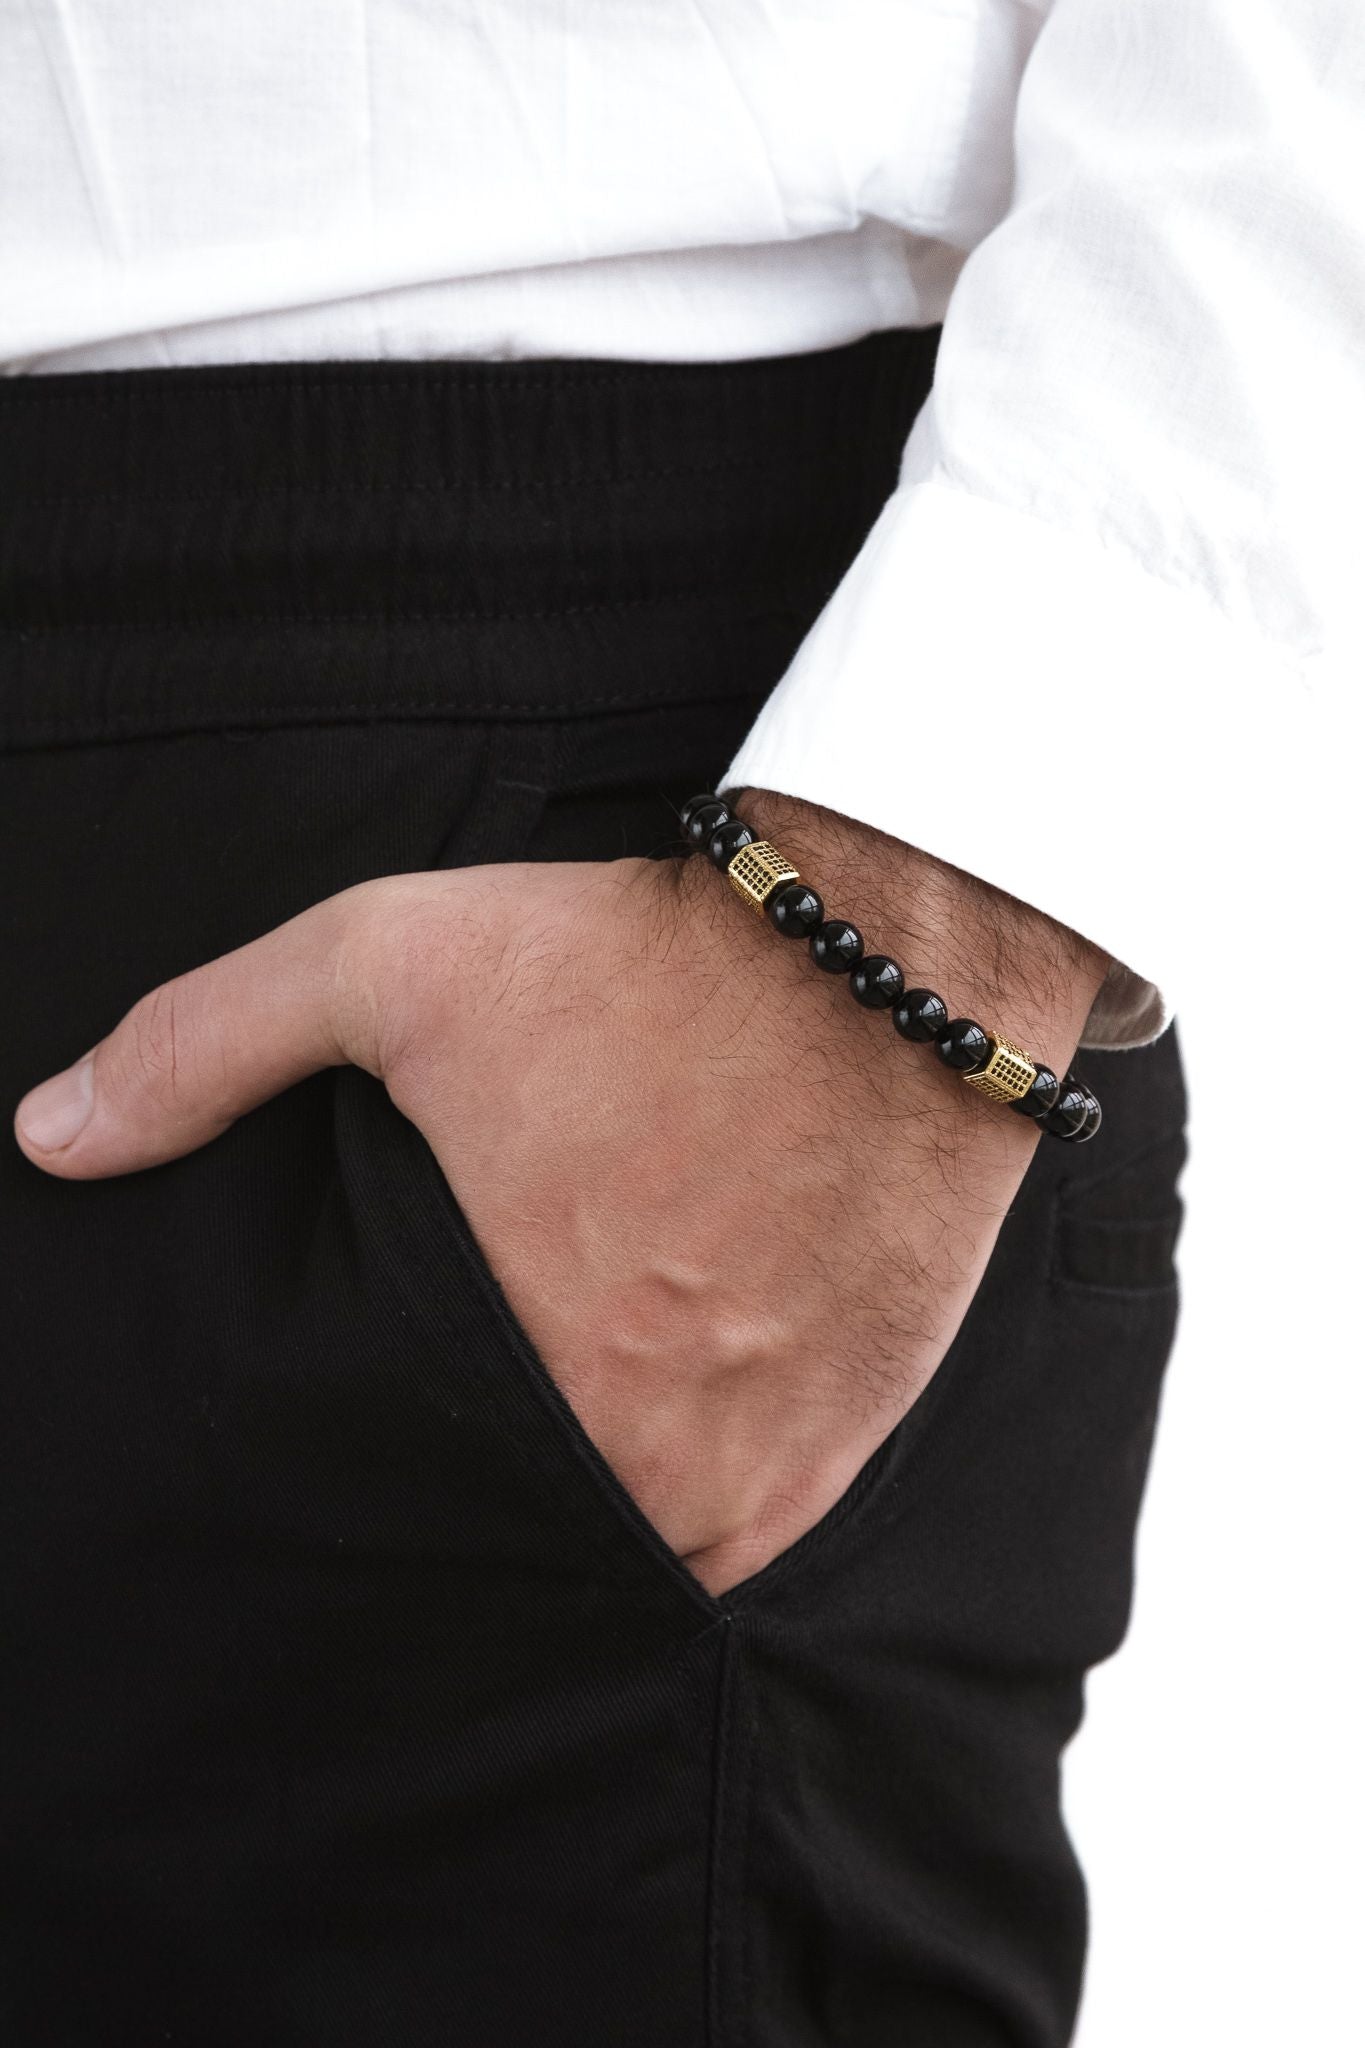 UNCOMMON Men's Beads Bracelet Two Gold Jeweled Chest Charm Black Gloss Onyx Beads